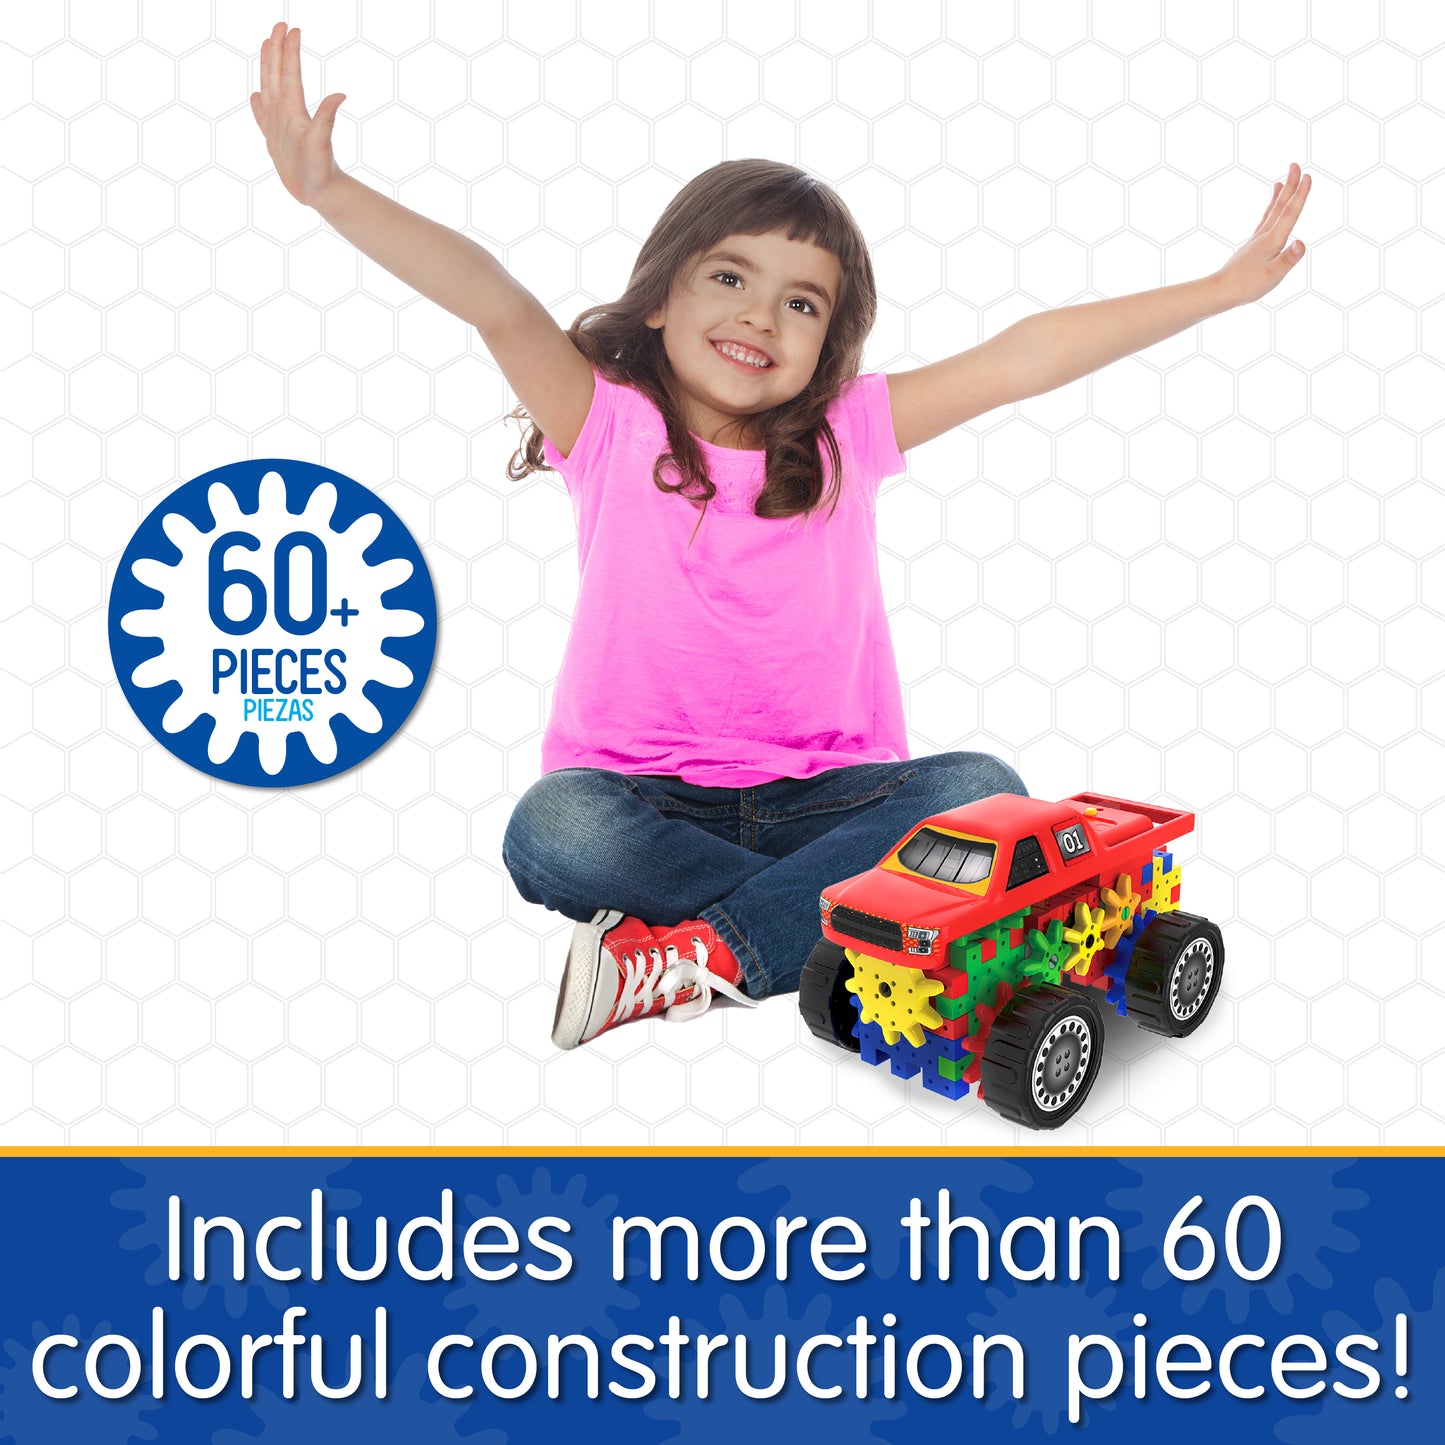 Infographic about Monster Truck 2.0 that says, "Includes more than 60 colorful construction pieces!"